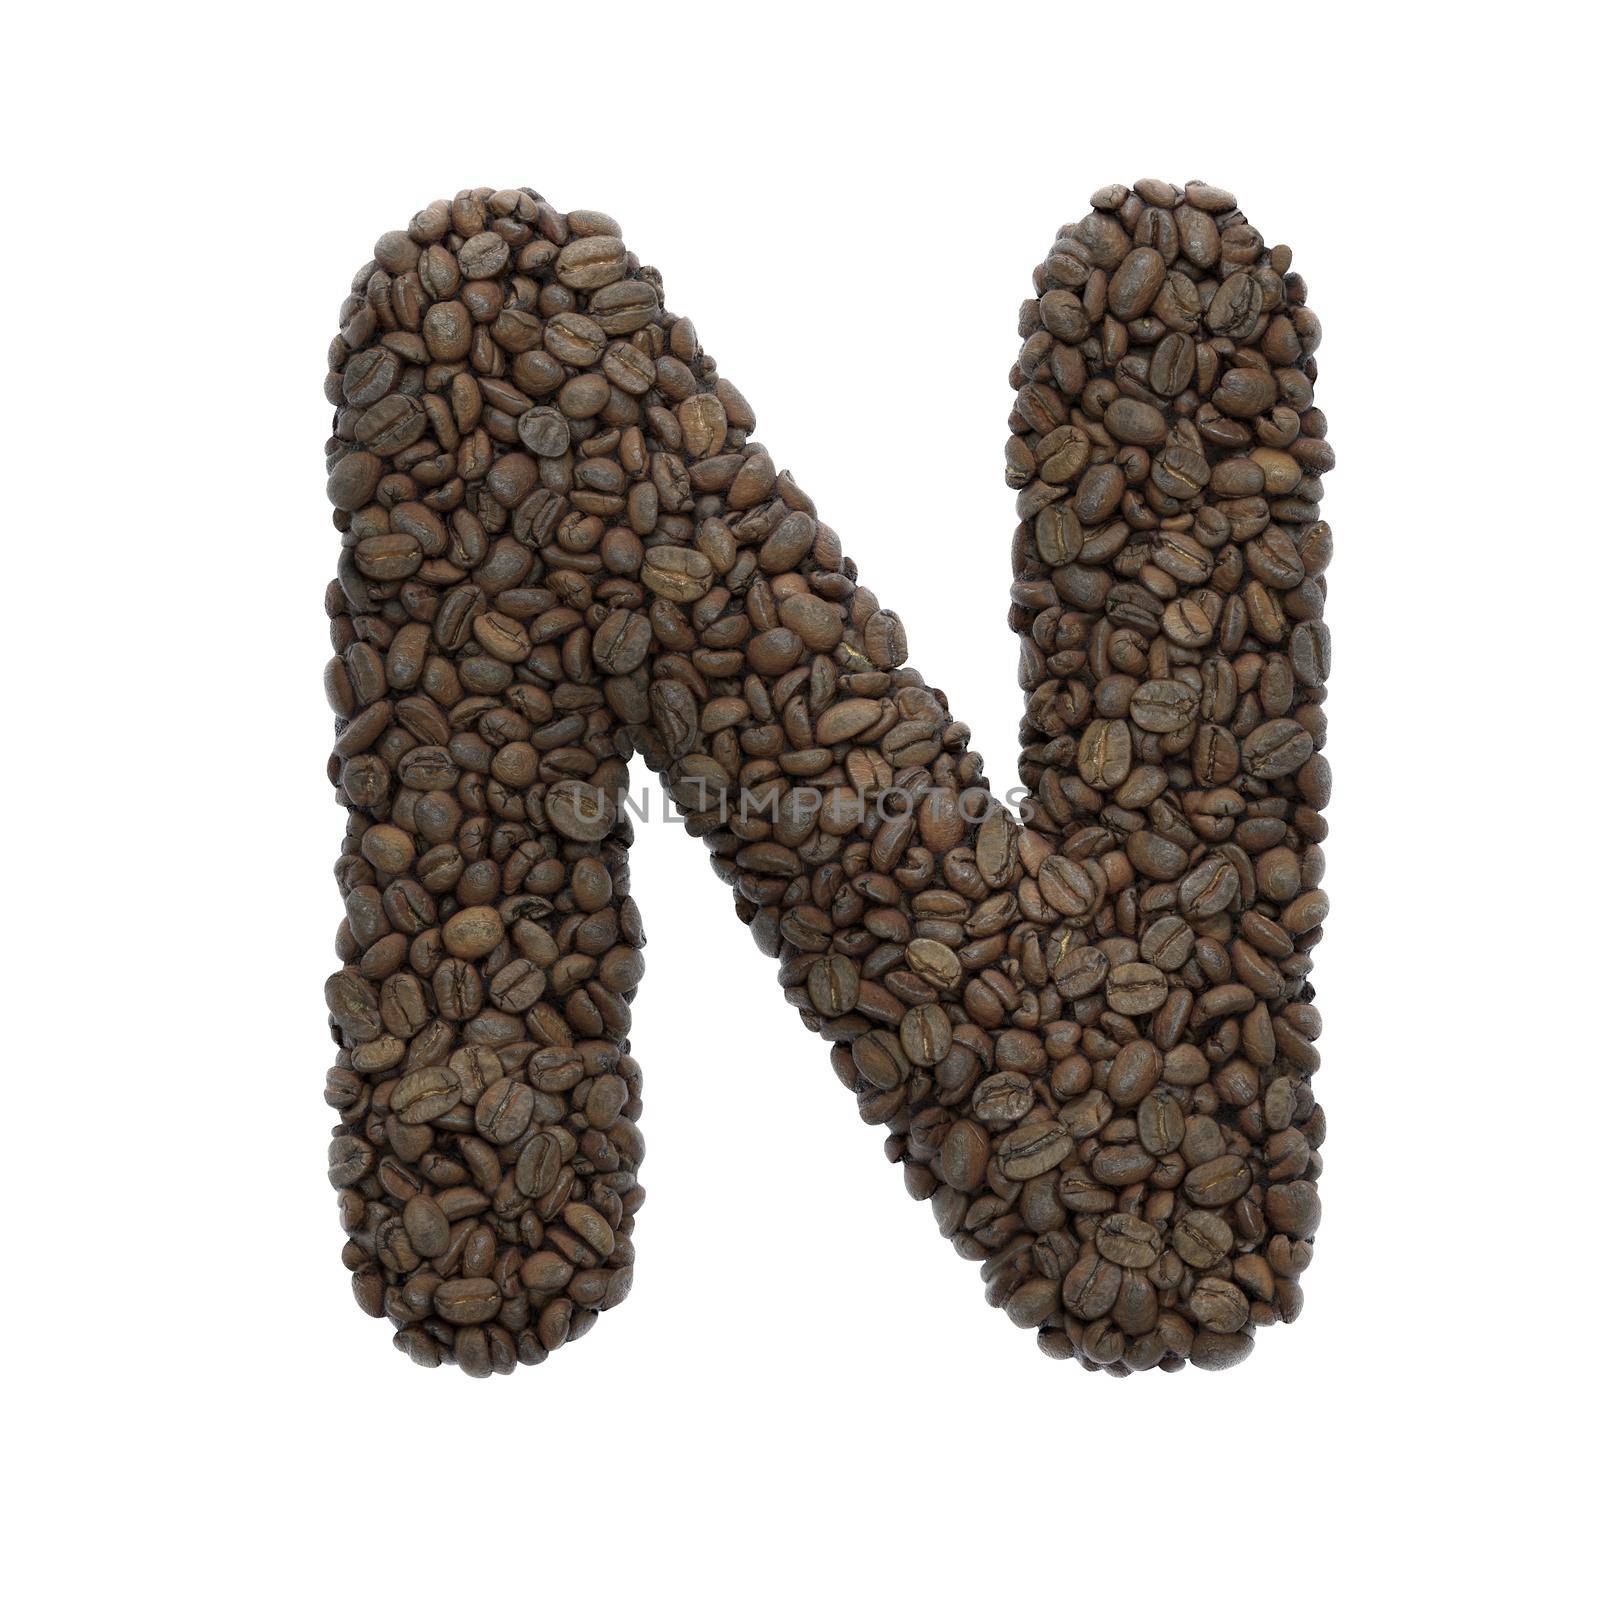 Coffee letter N - Uppercase 3d roasted beans font isolated on white background. This alphabet is perfect for creative illustrations related but not limited to Coffee, energy, insomnia...